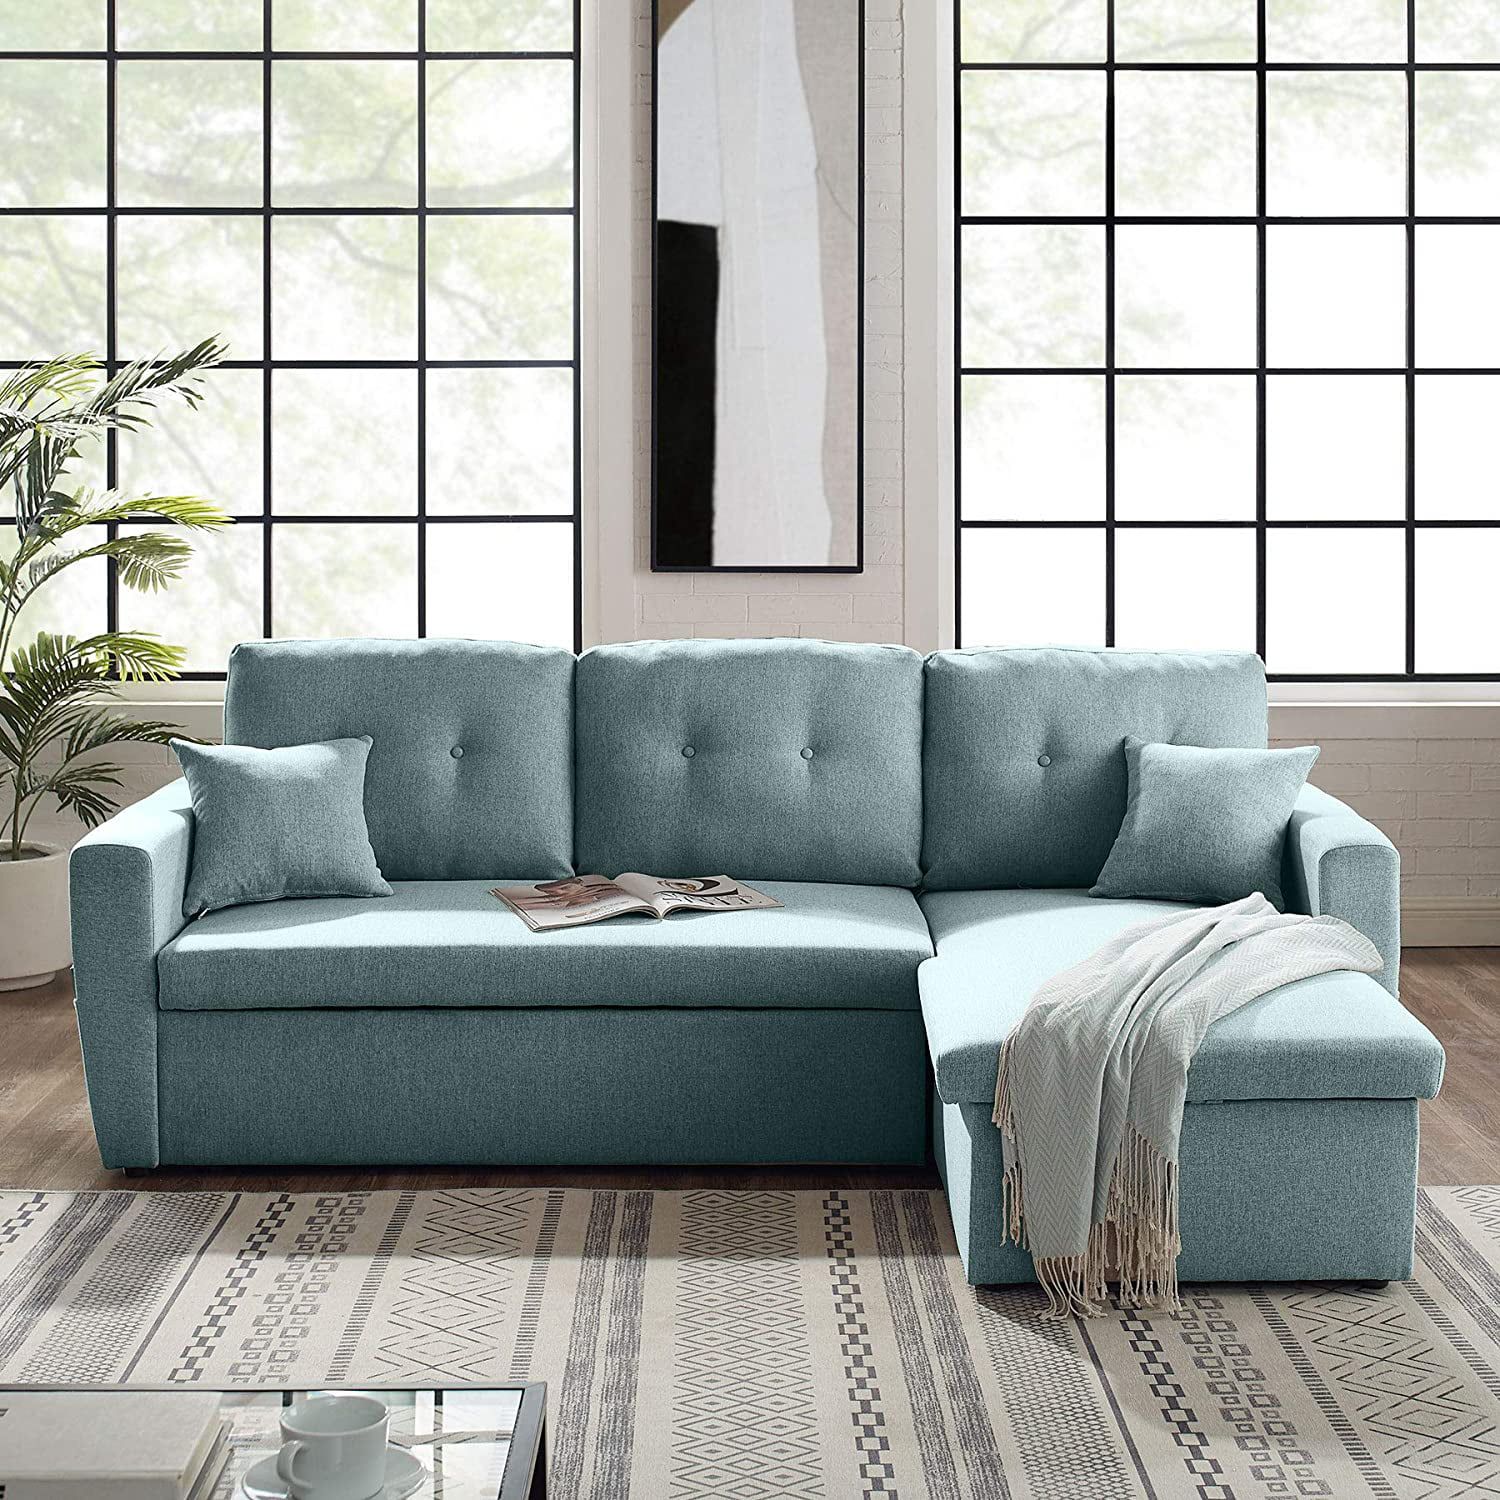 3 Seater Sofa Bed With Storage, Tribesigns 86.6” Convertible Sectional Pertaining To Convertible L Shaped Sectional Sofas (Gallery 4 of 20)